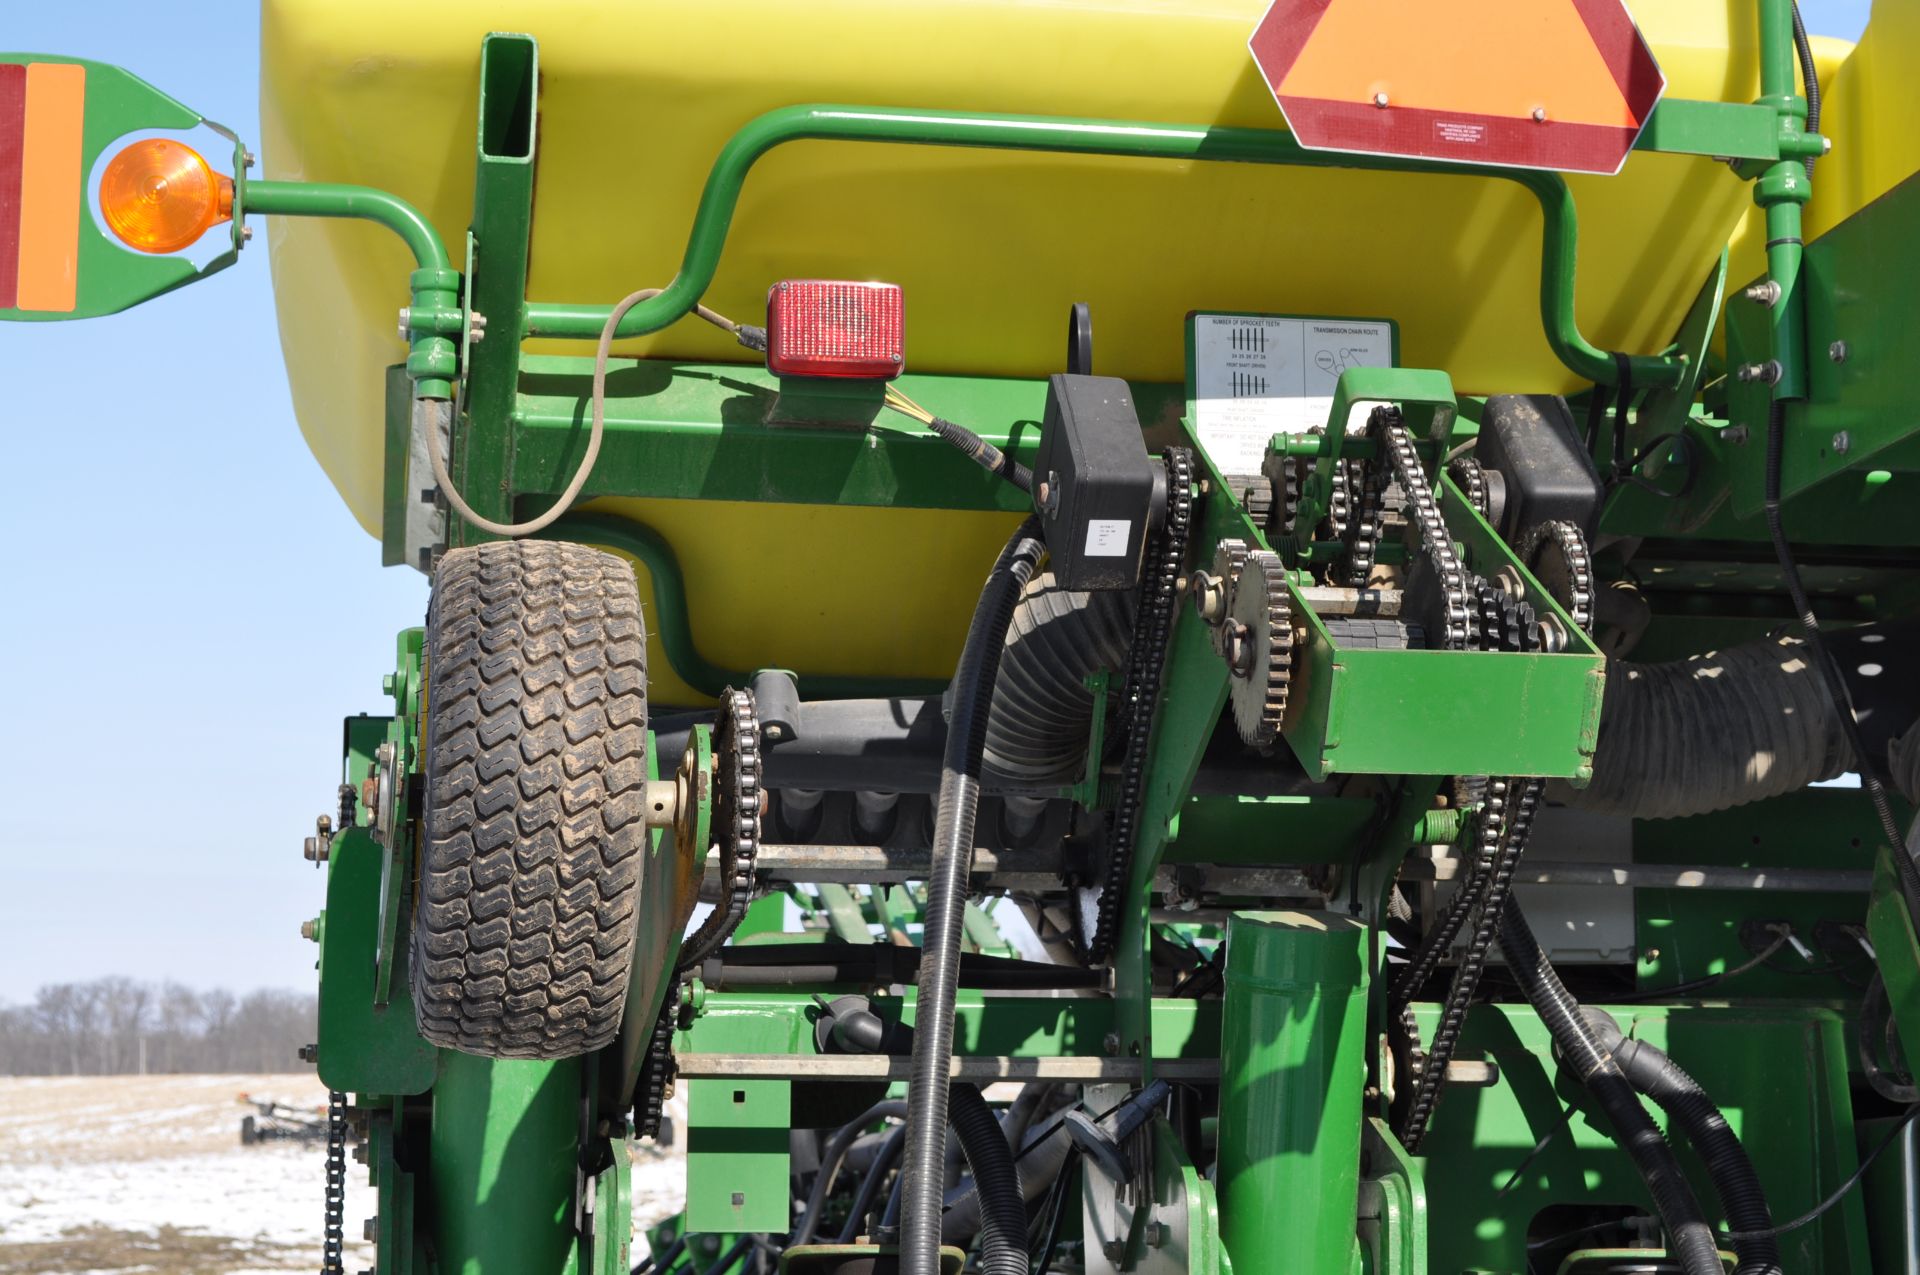 John Deere 1770 NT 24 row 30” planter, front fold, CCS, Refuge Plus tank, markers, no-till coulters, - Image 17 of 25